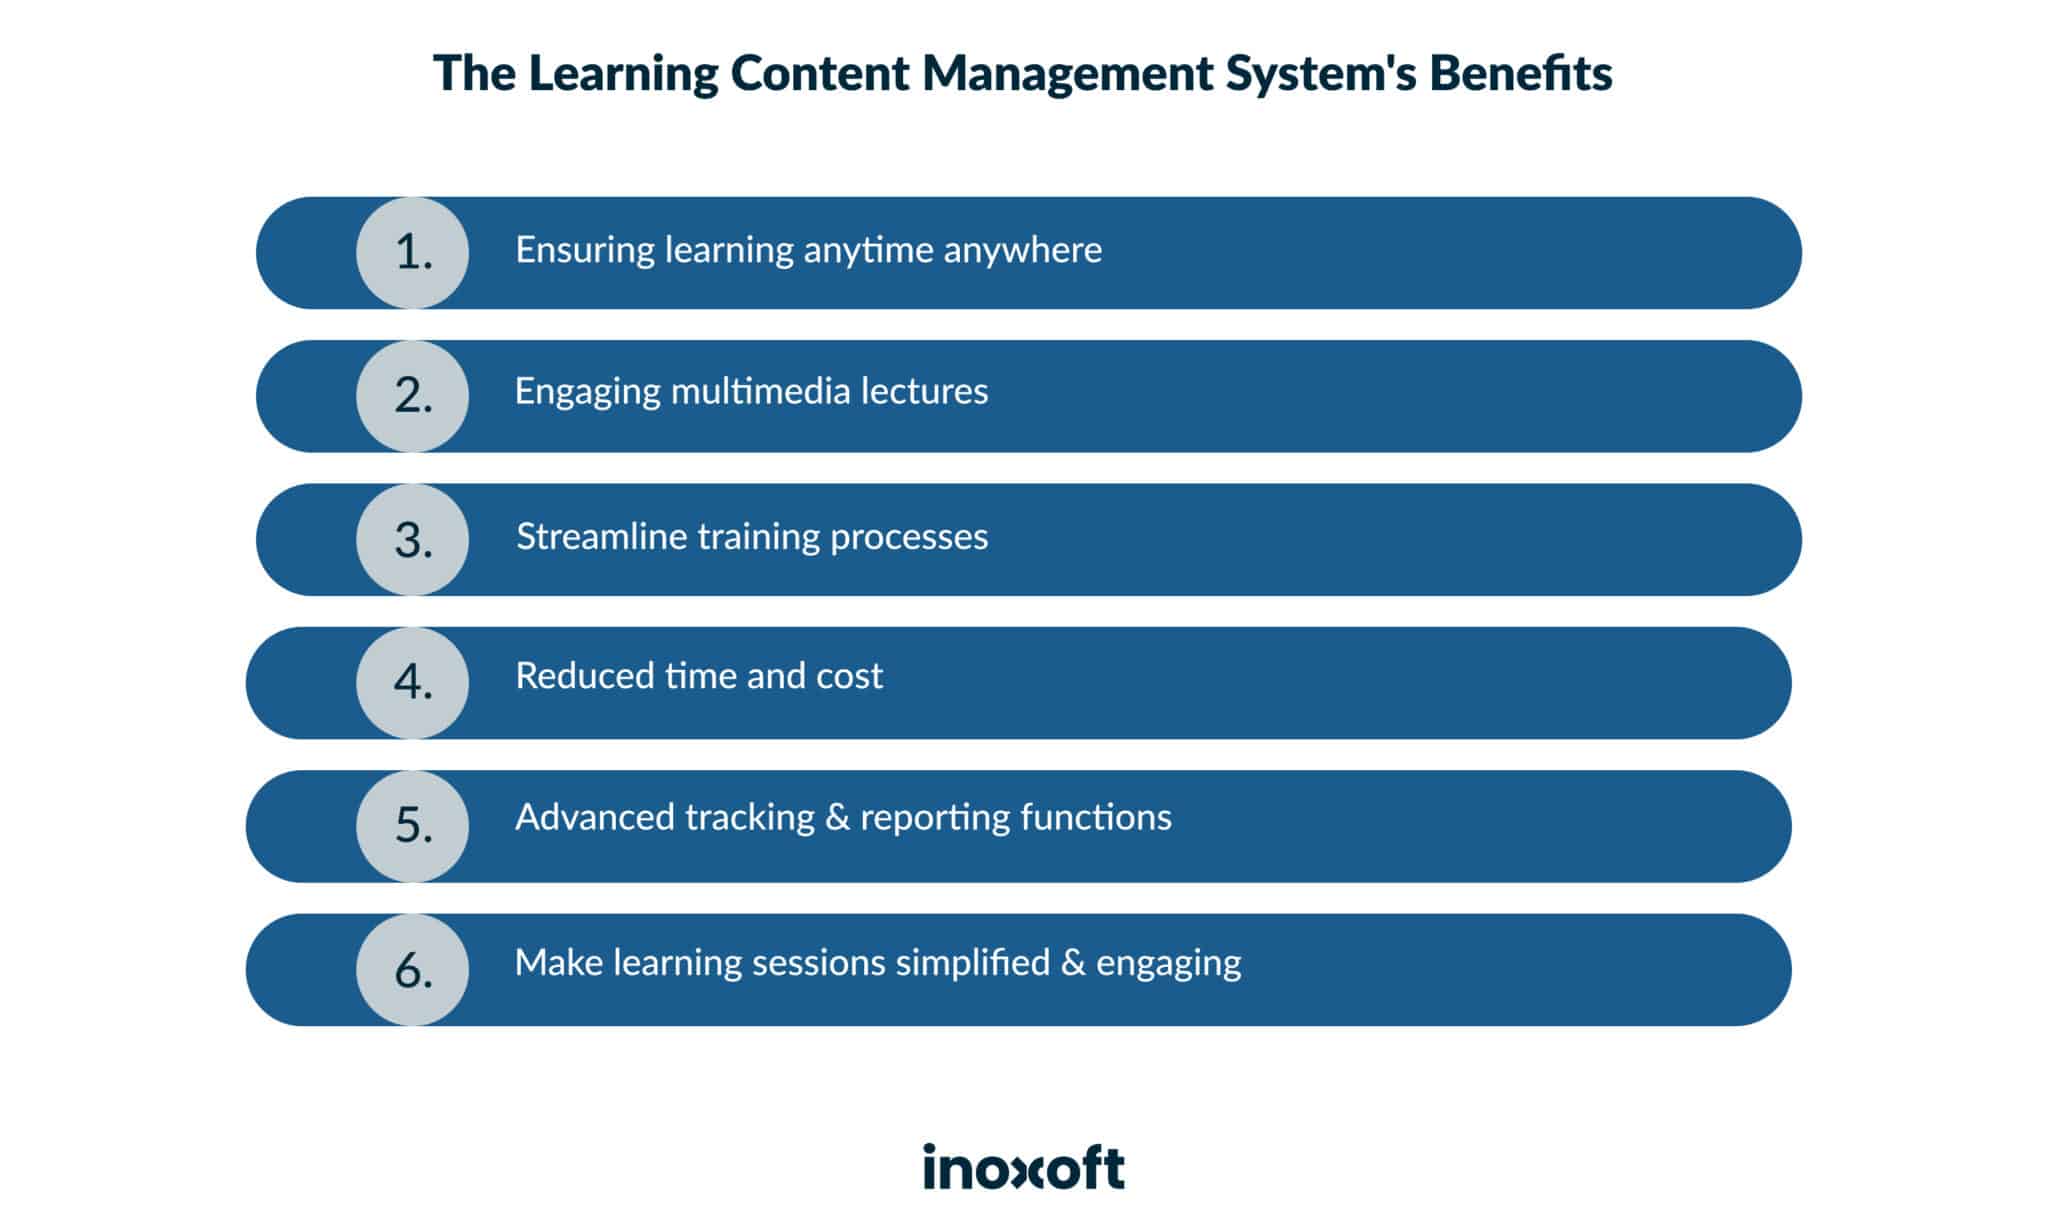 The learning content management system's benefits